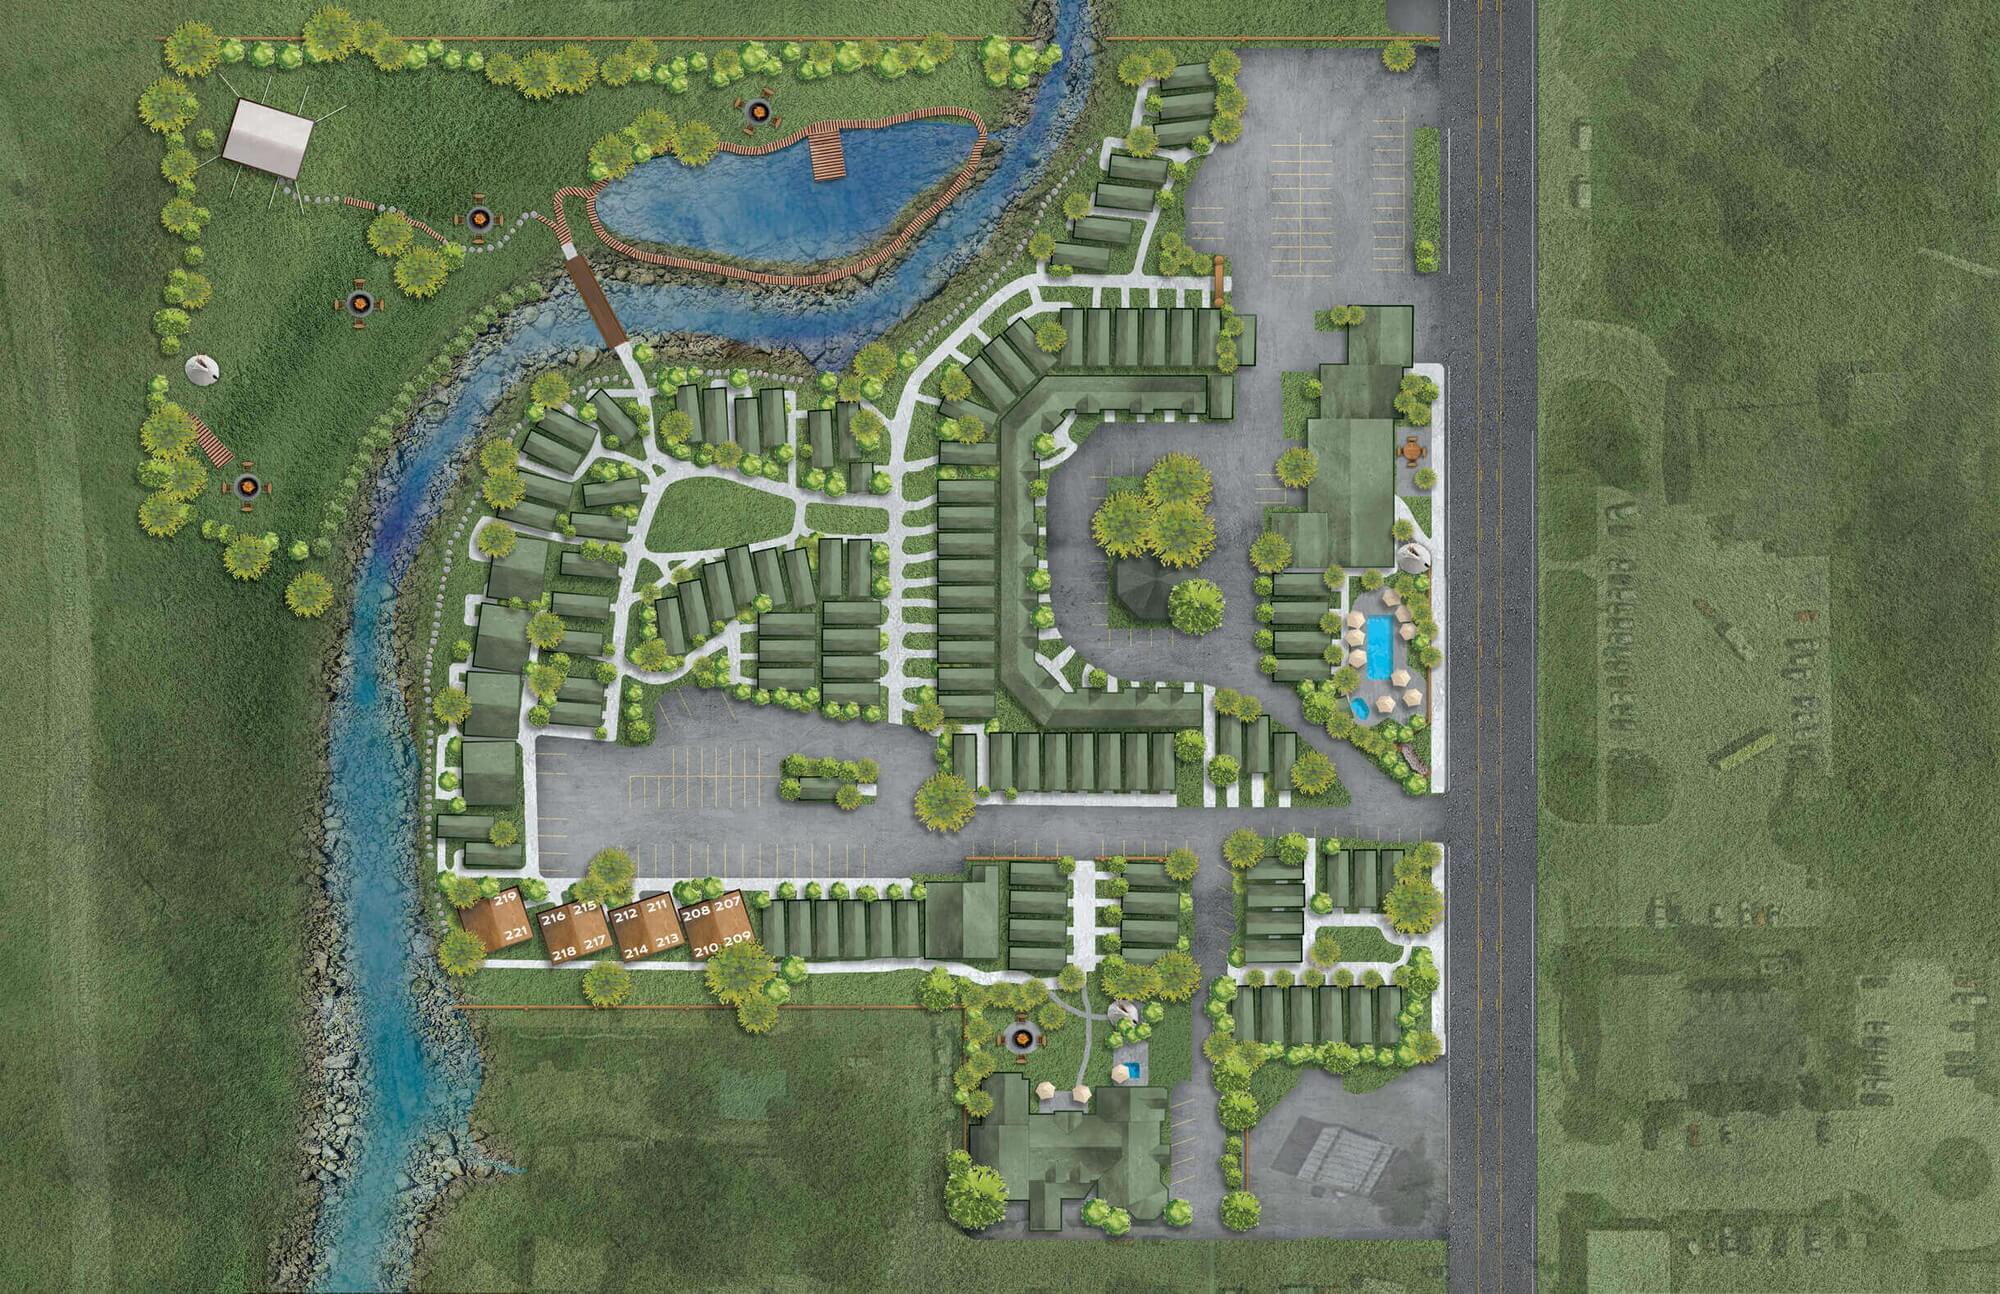 Rustic Inn grounds map with superior double queen guestrooms